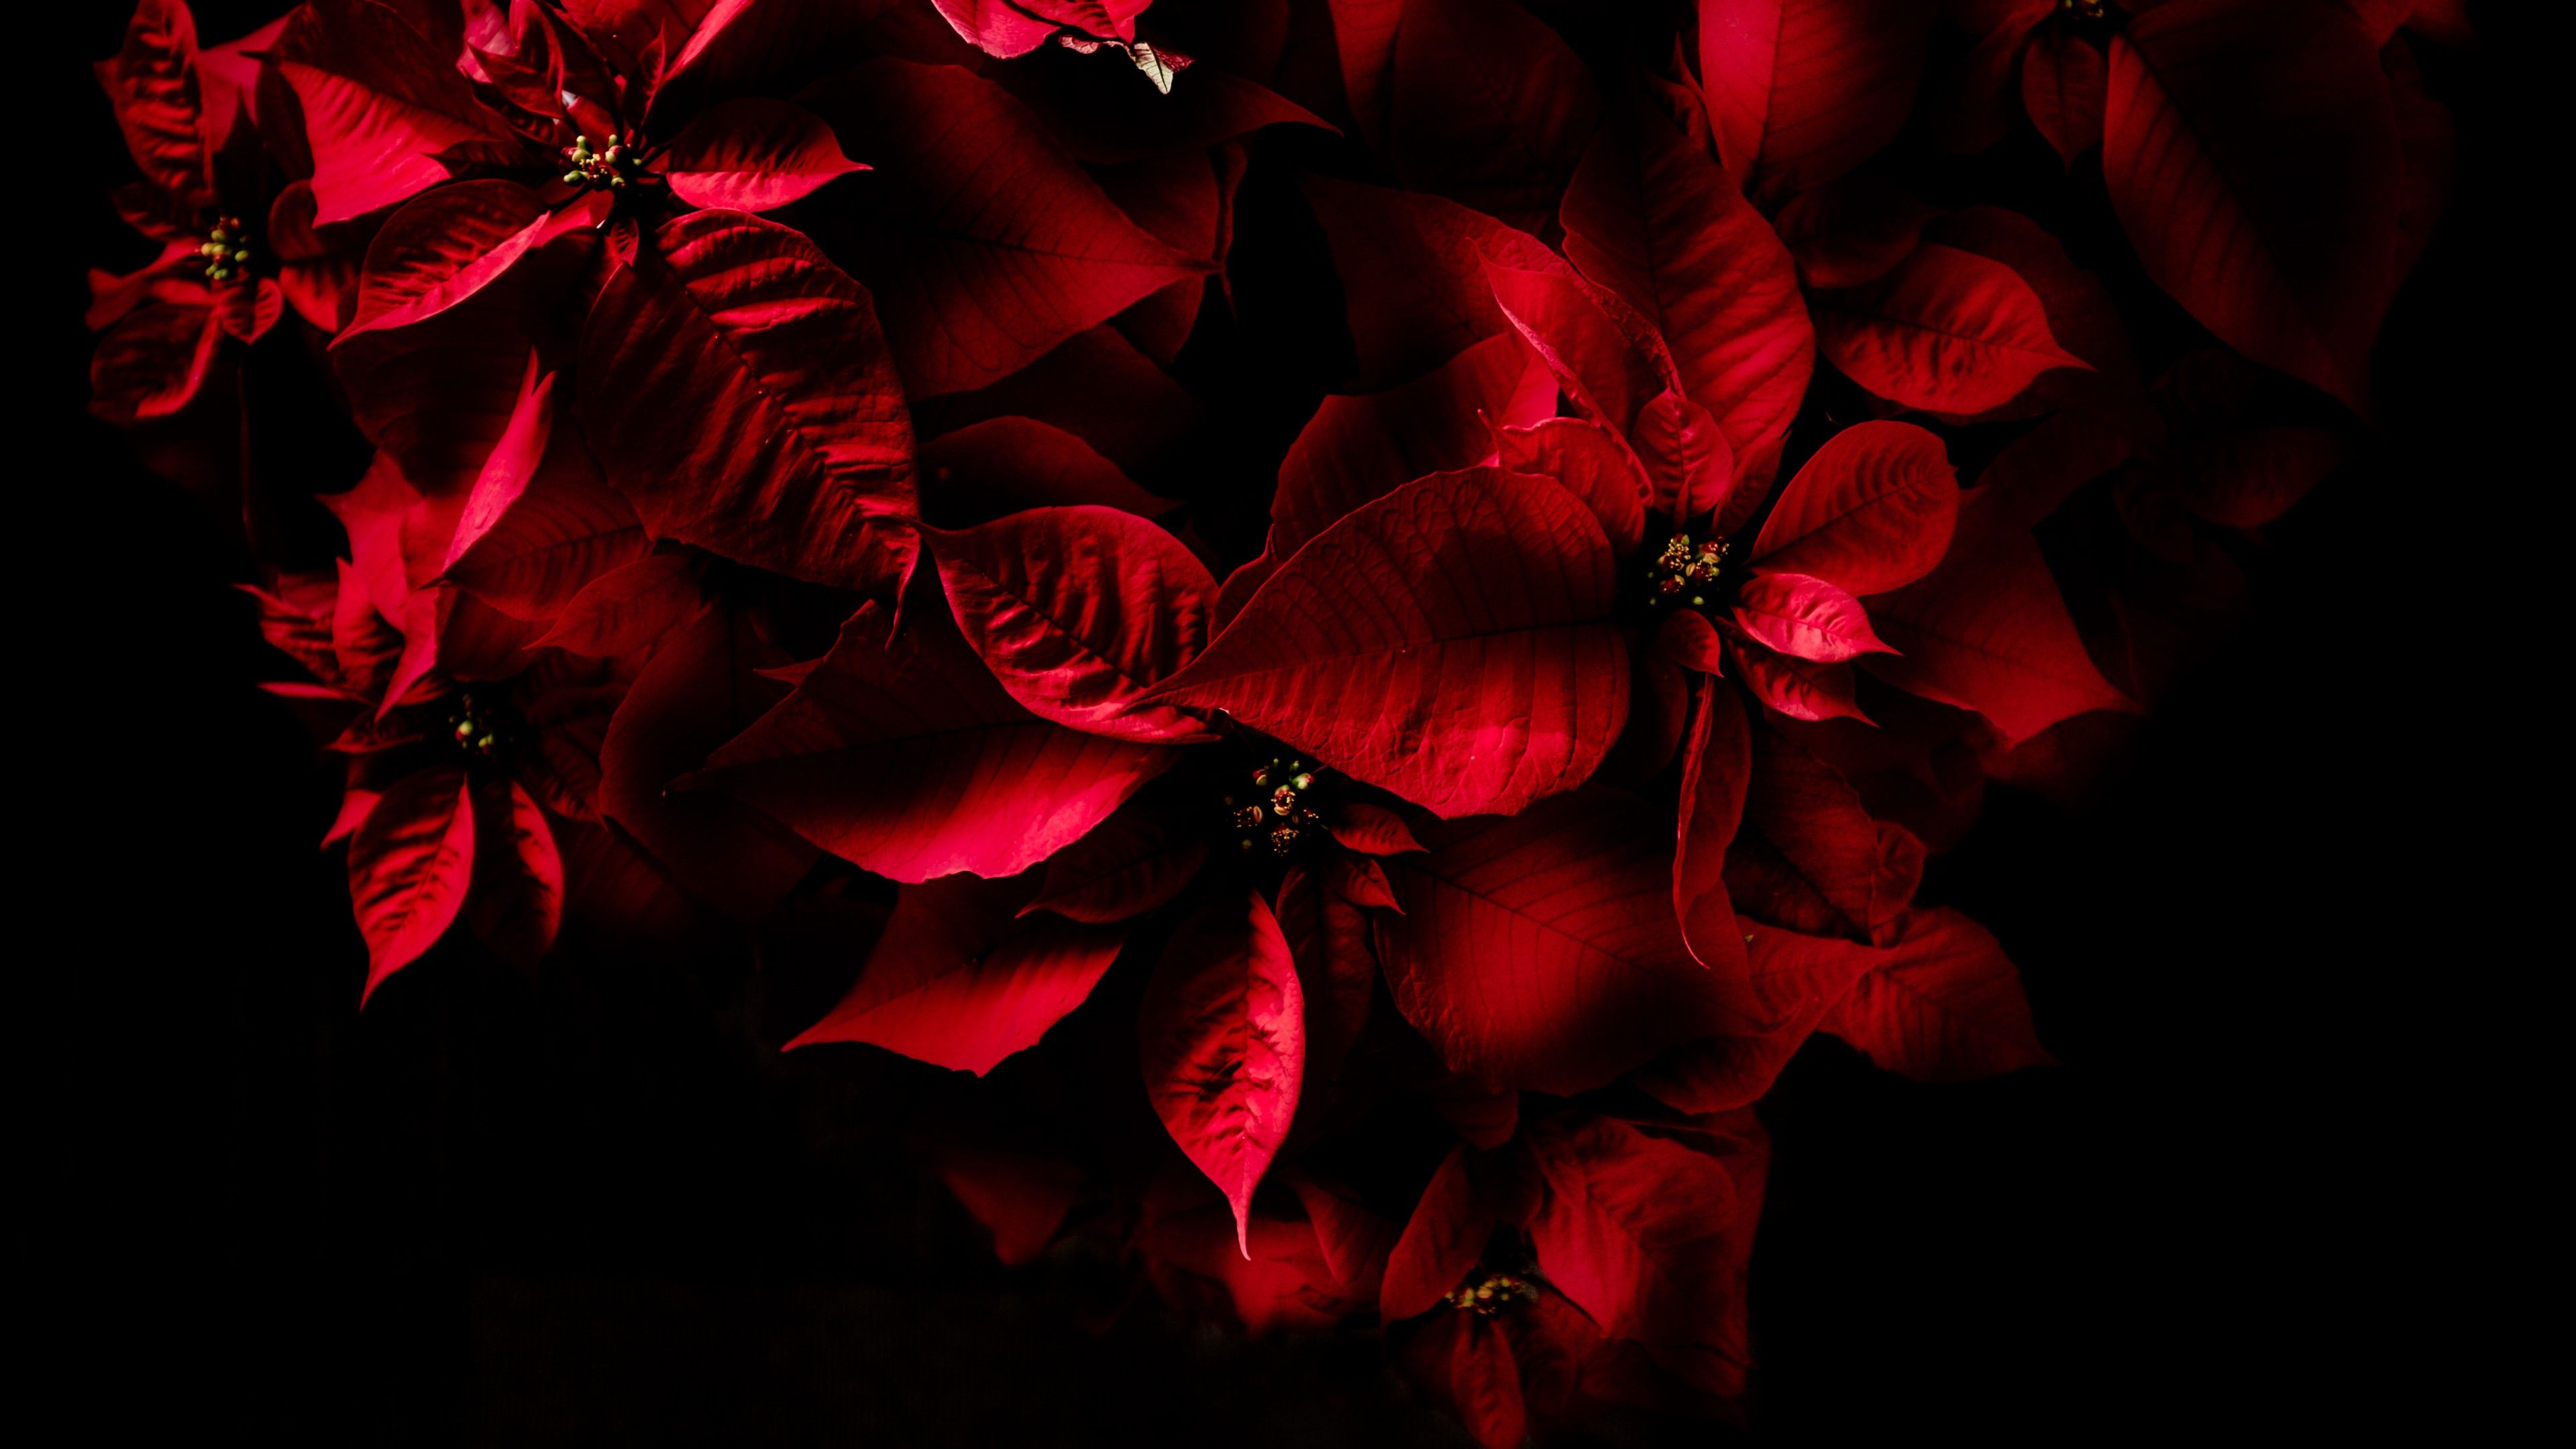 Wallpaper Red leaves, Dark, AMOLED, 4K, Flowers,. Wallpaper for iPhone, Android, Mobile and Desktop